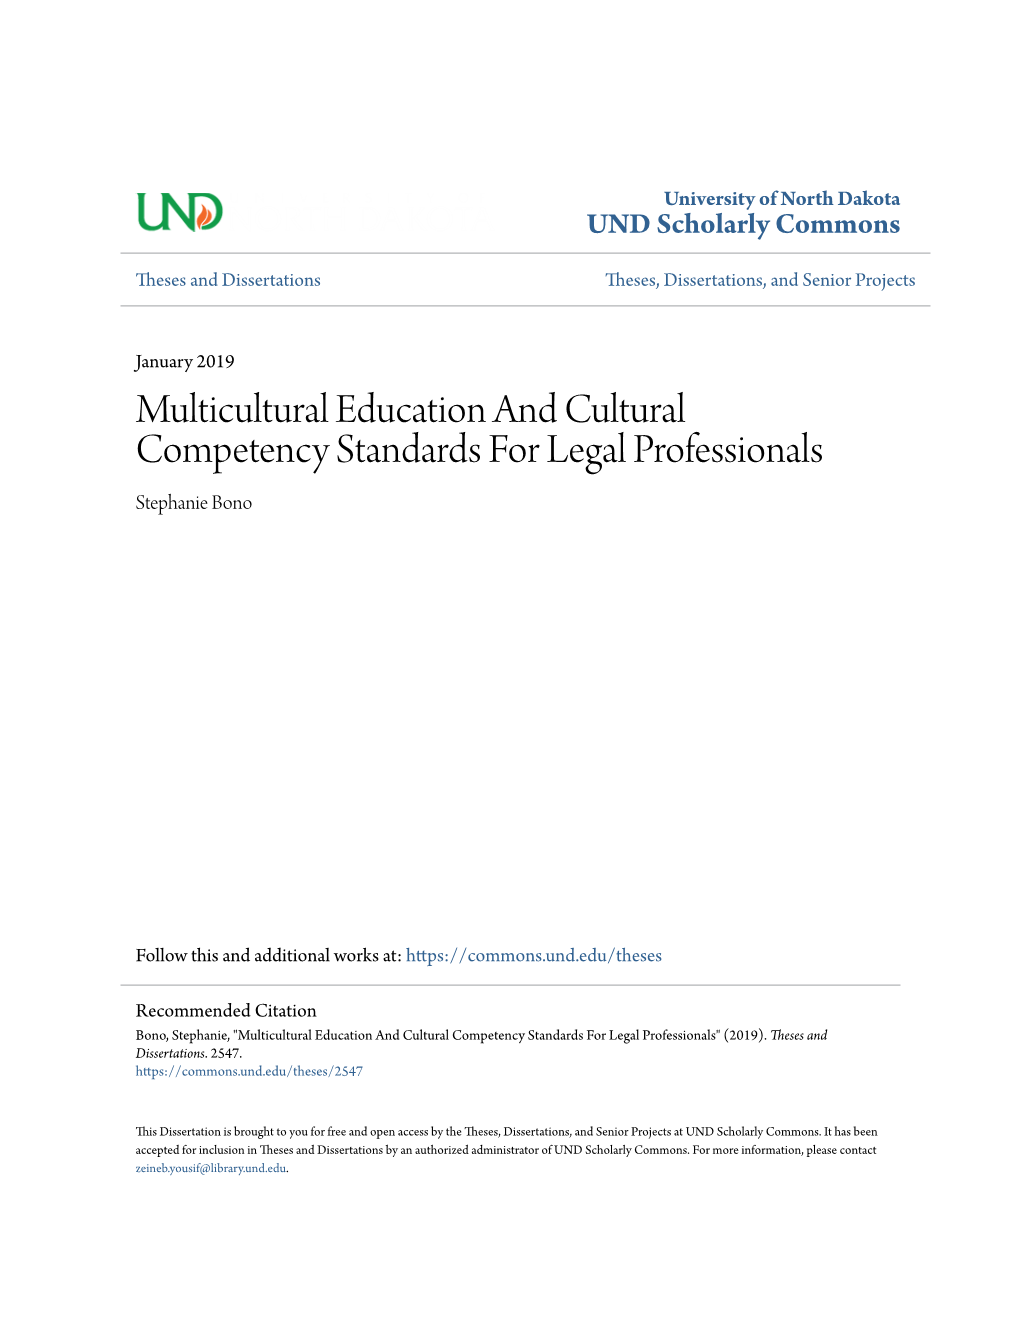 Multicultural Education and Cultural Competency Standards for Legal Professionals Stephanie Bono